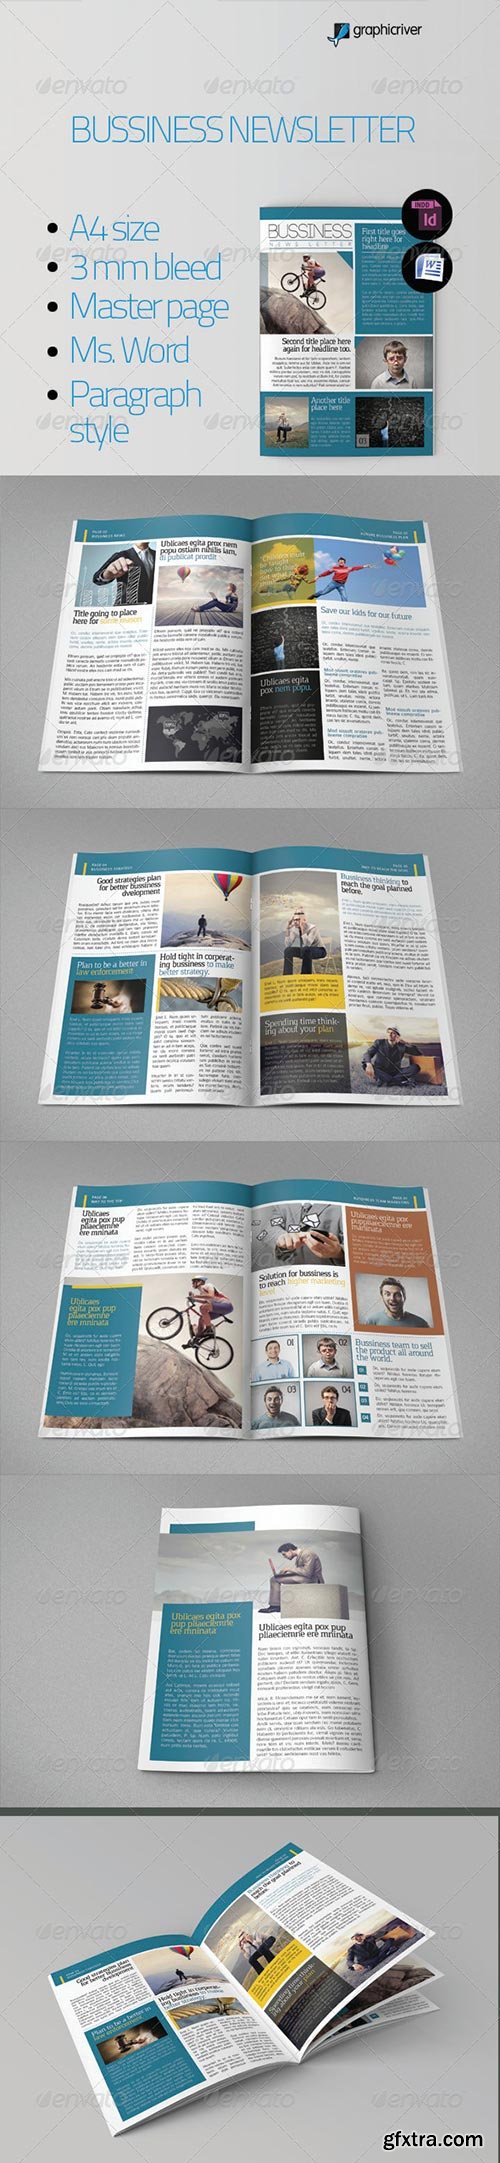 GraphicRiver - Bussiness Newsletter 7008166